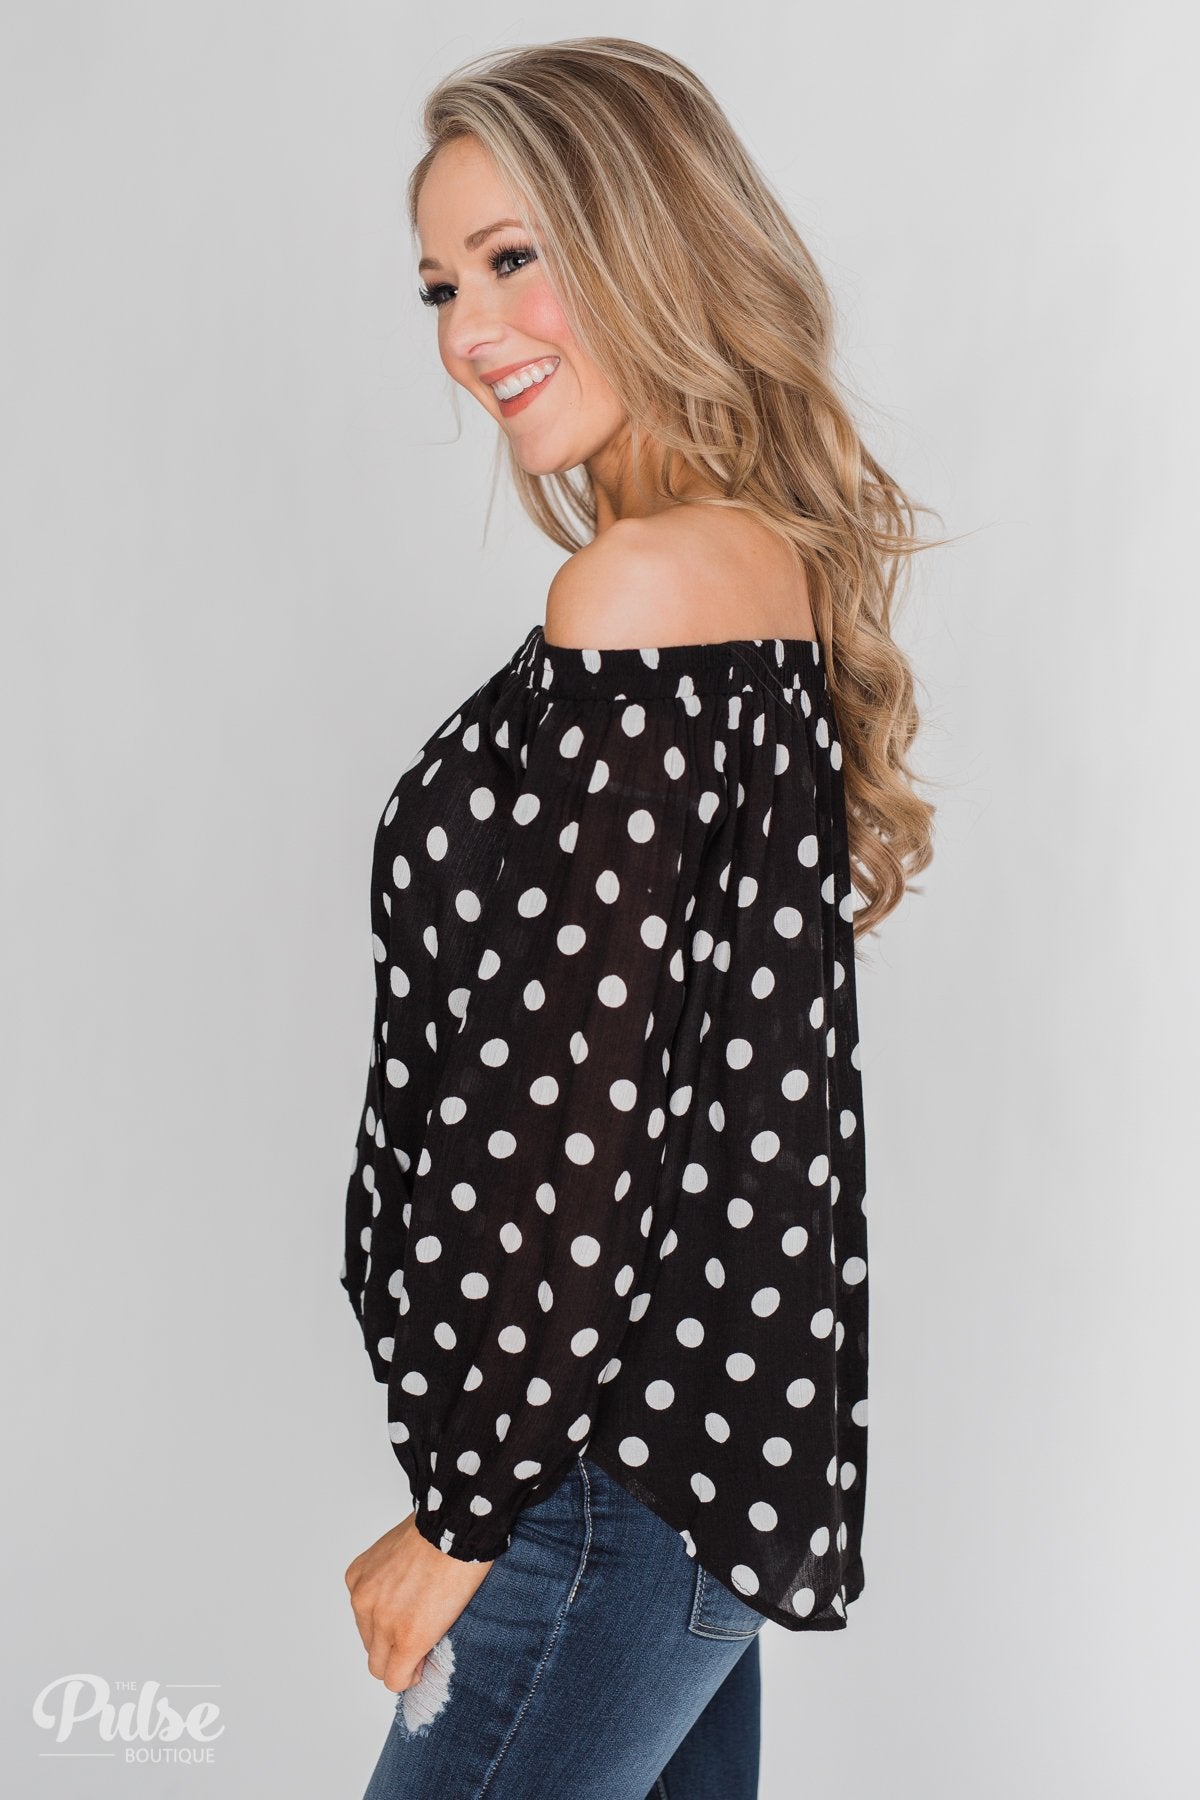 Wrapped Up In Polka Dots Off The Shoulder Blouse- Black